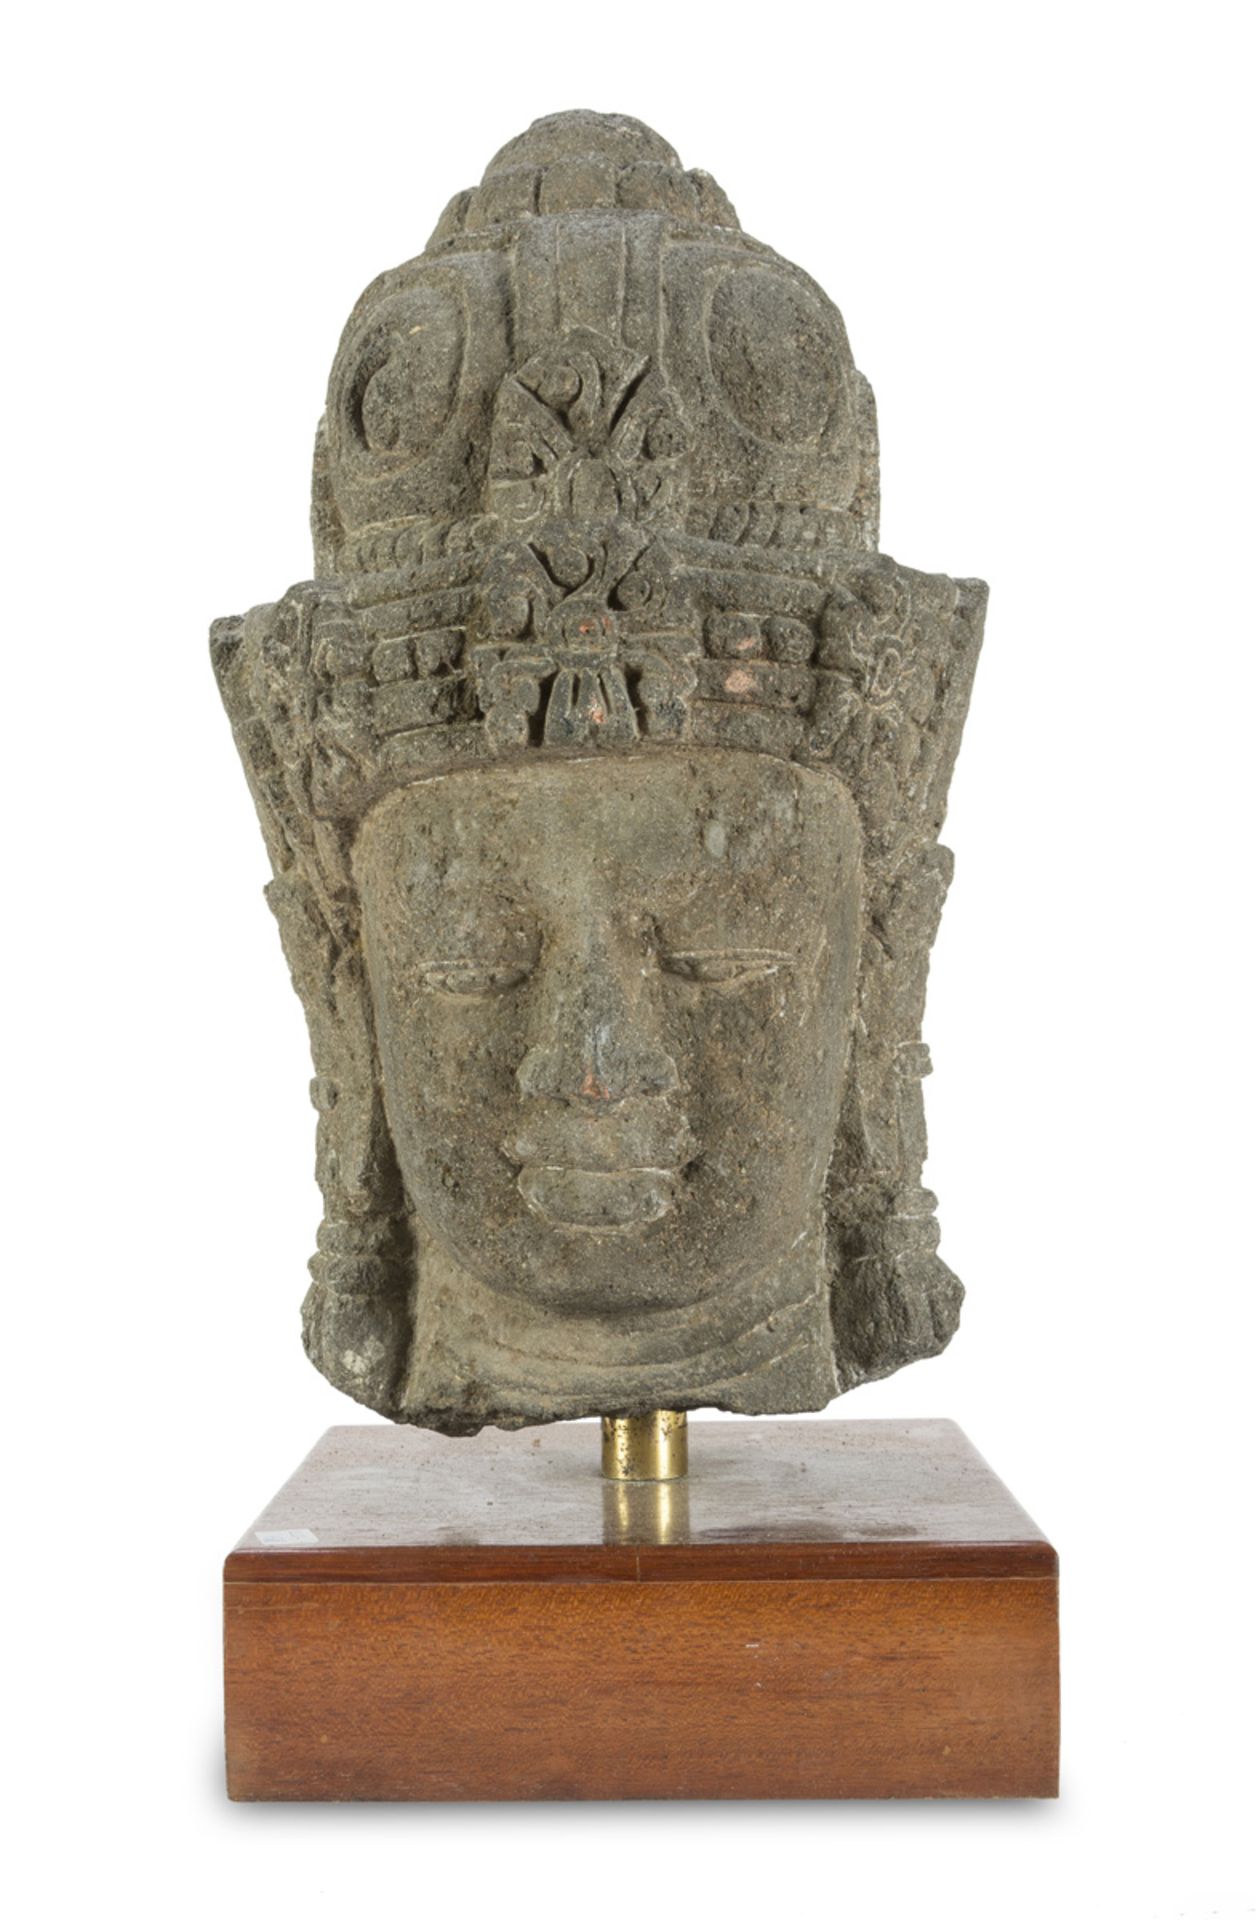 BIG HEAD IN SANDSTONE, CAMBODIA 20TH CENTURY representing the face of Buddha realized in khmer